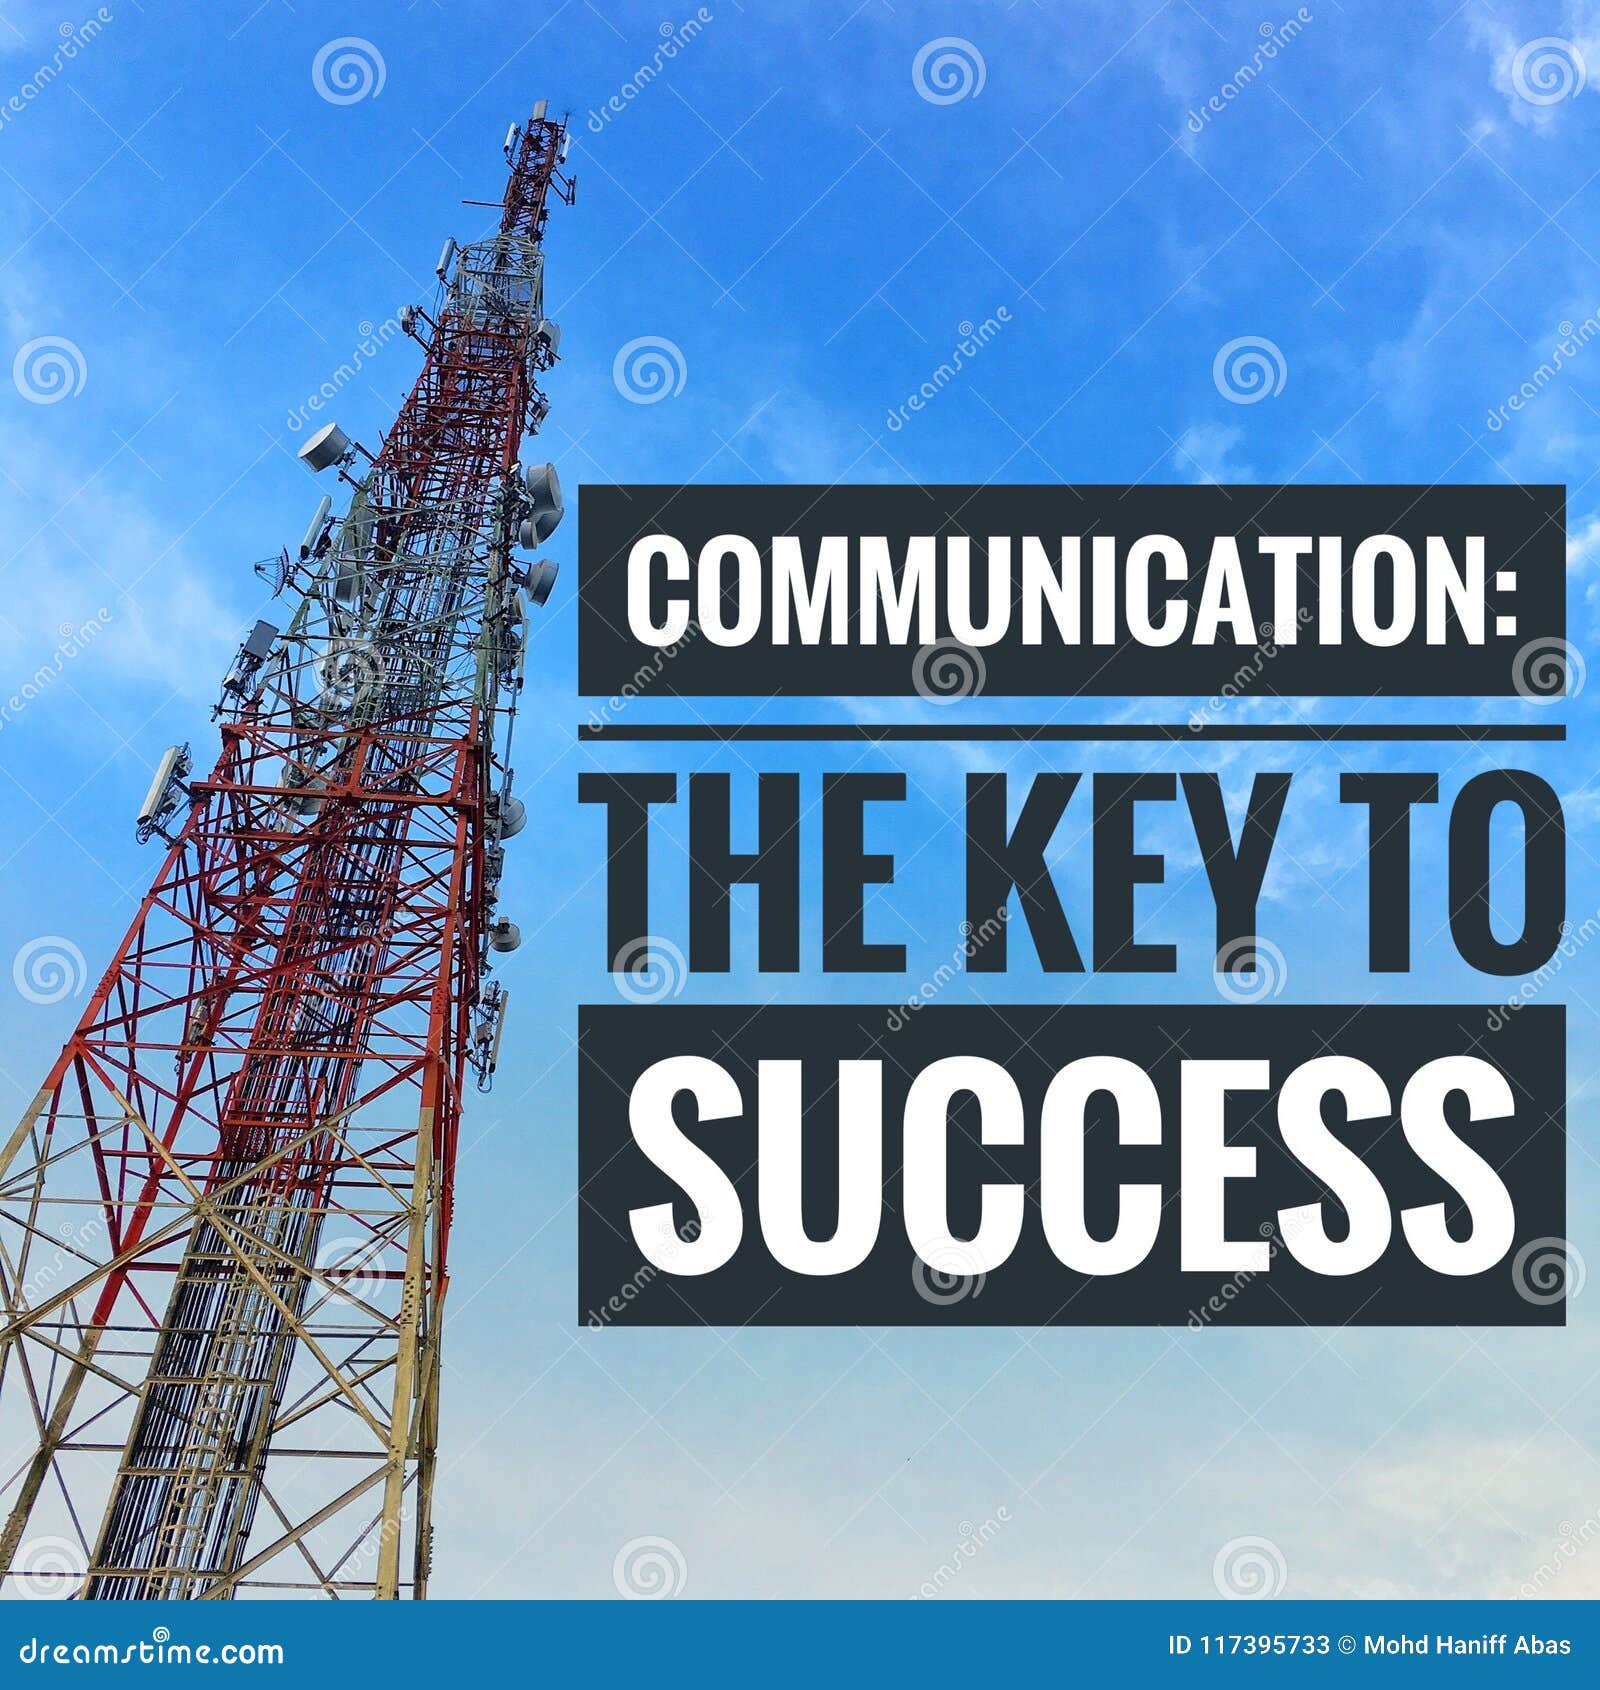 All 90+ Images communication is the key to success quote Full HD, 2k, 4k